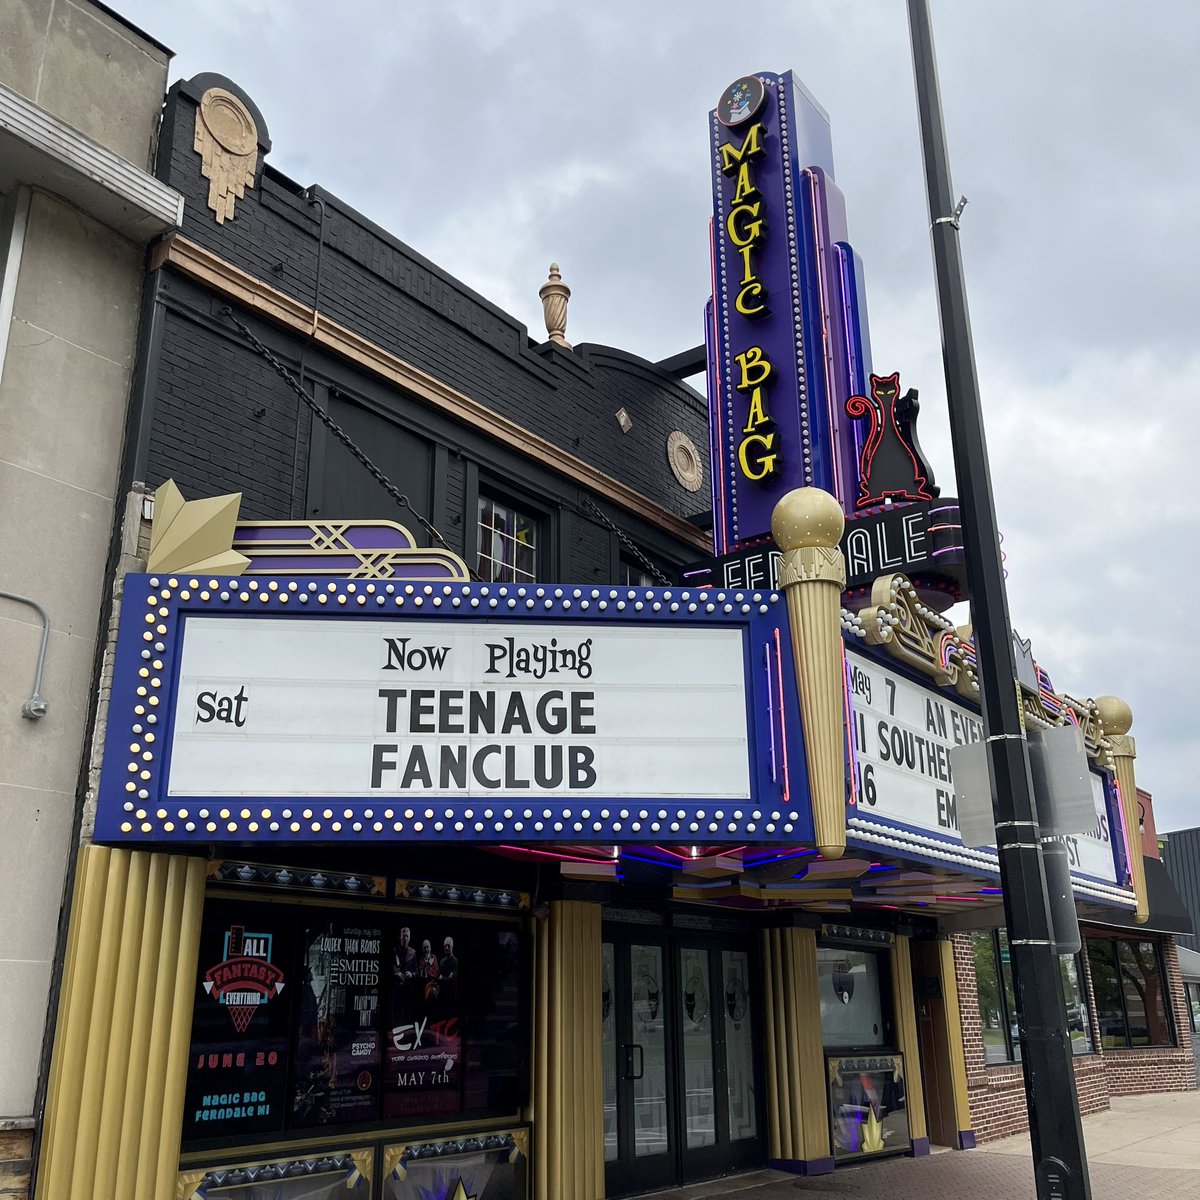 TONIGHT. Live at The Magic Bag in Ferndale, MI. Doors - 7pm Sweet Baboo - 8pm Teenage Fanclub - 9pm Tickets available at the door.